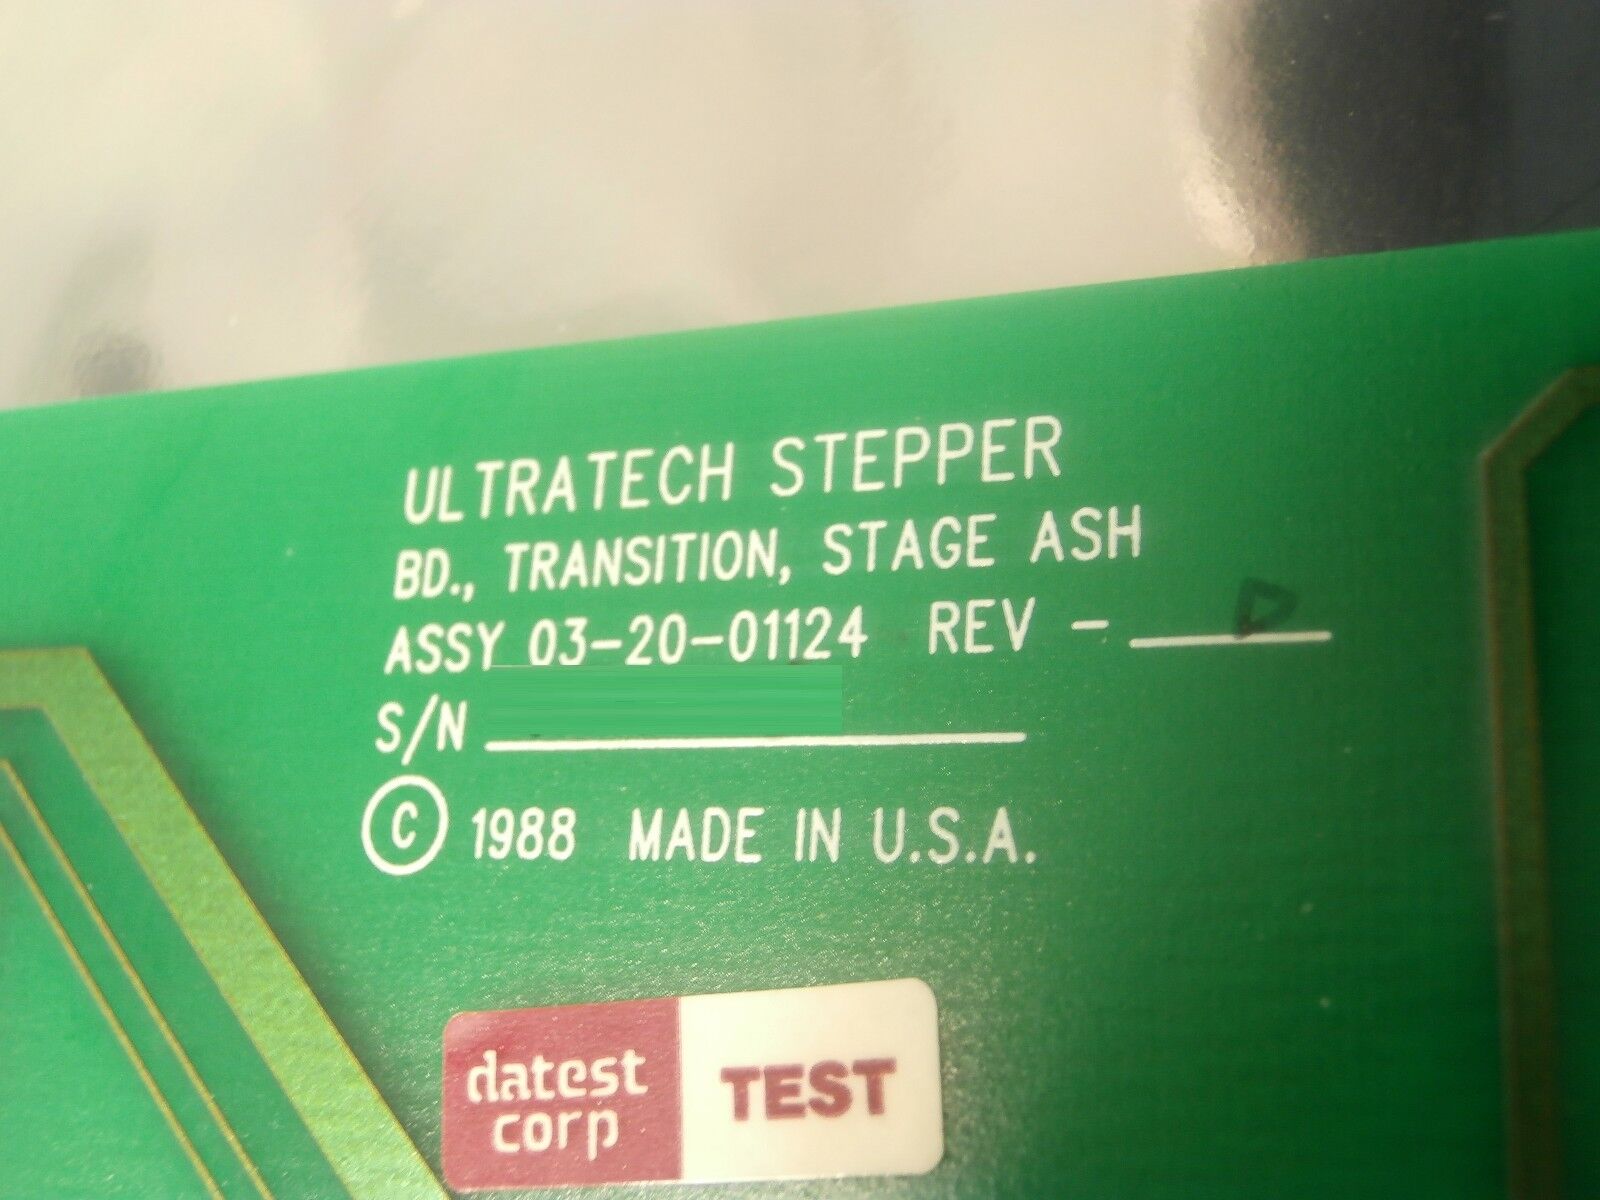 Ultratech Stepper 03-20-01124 Transition Y Stage ASH PCB Card Rev. D Titan Used